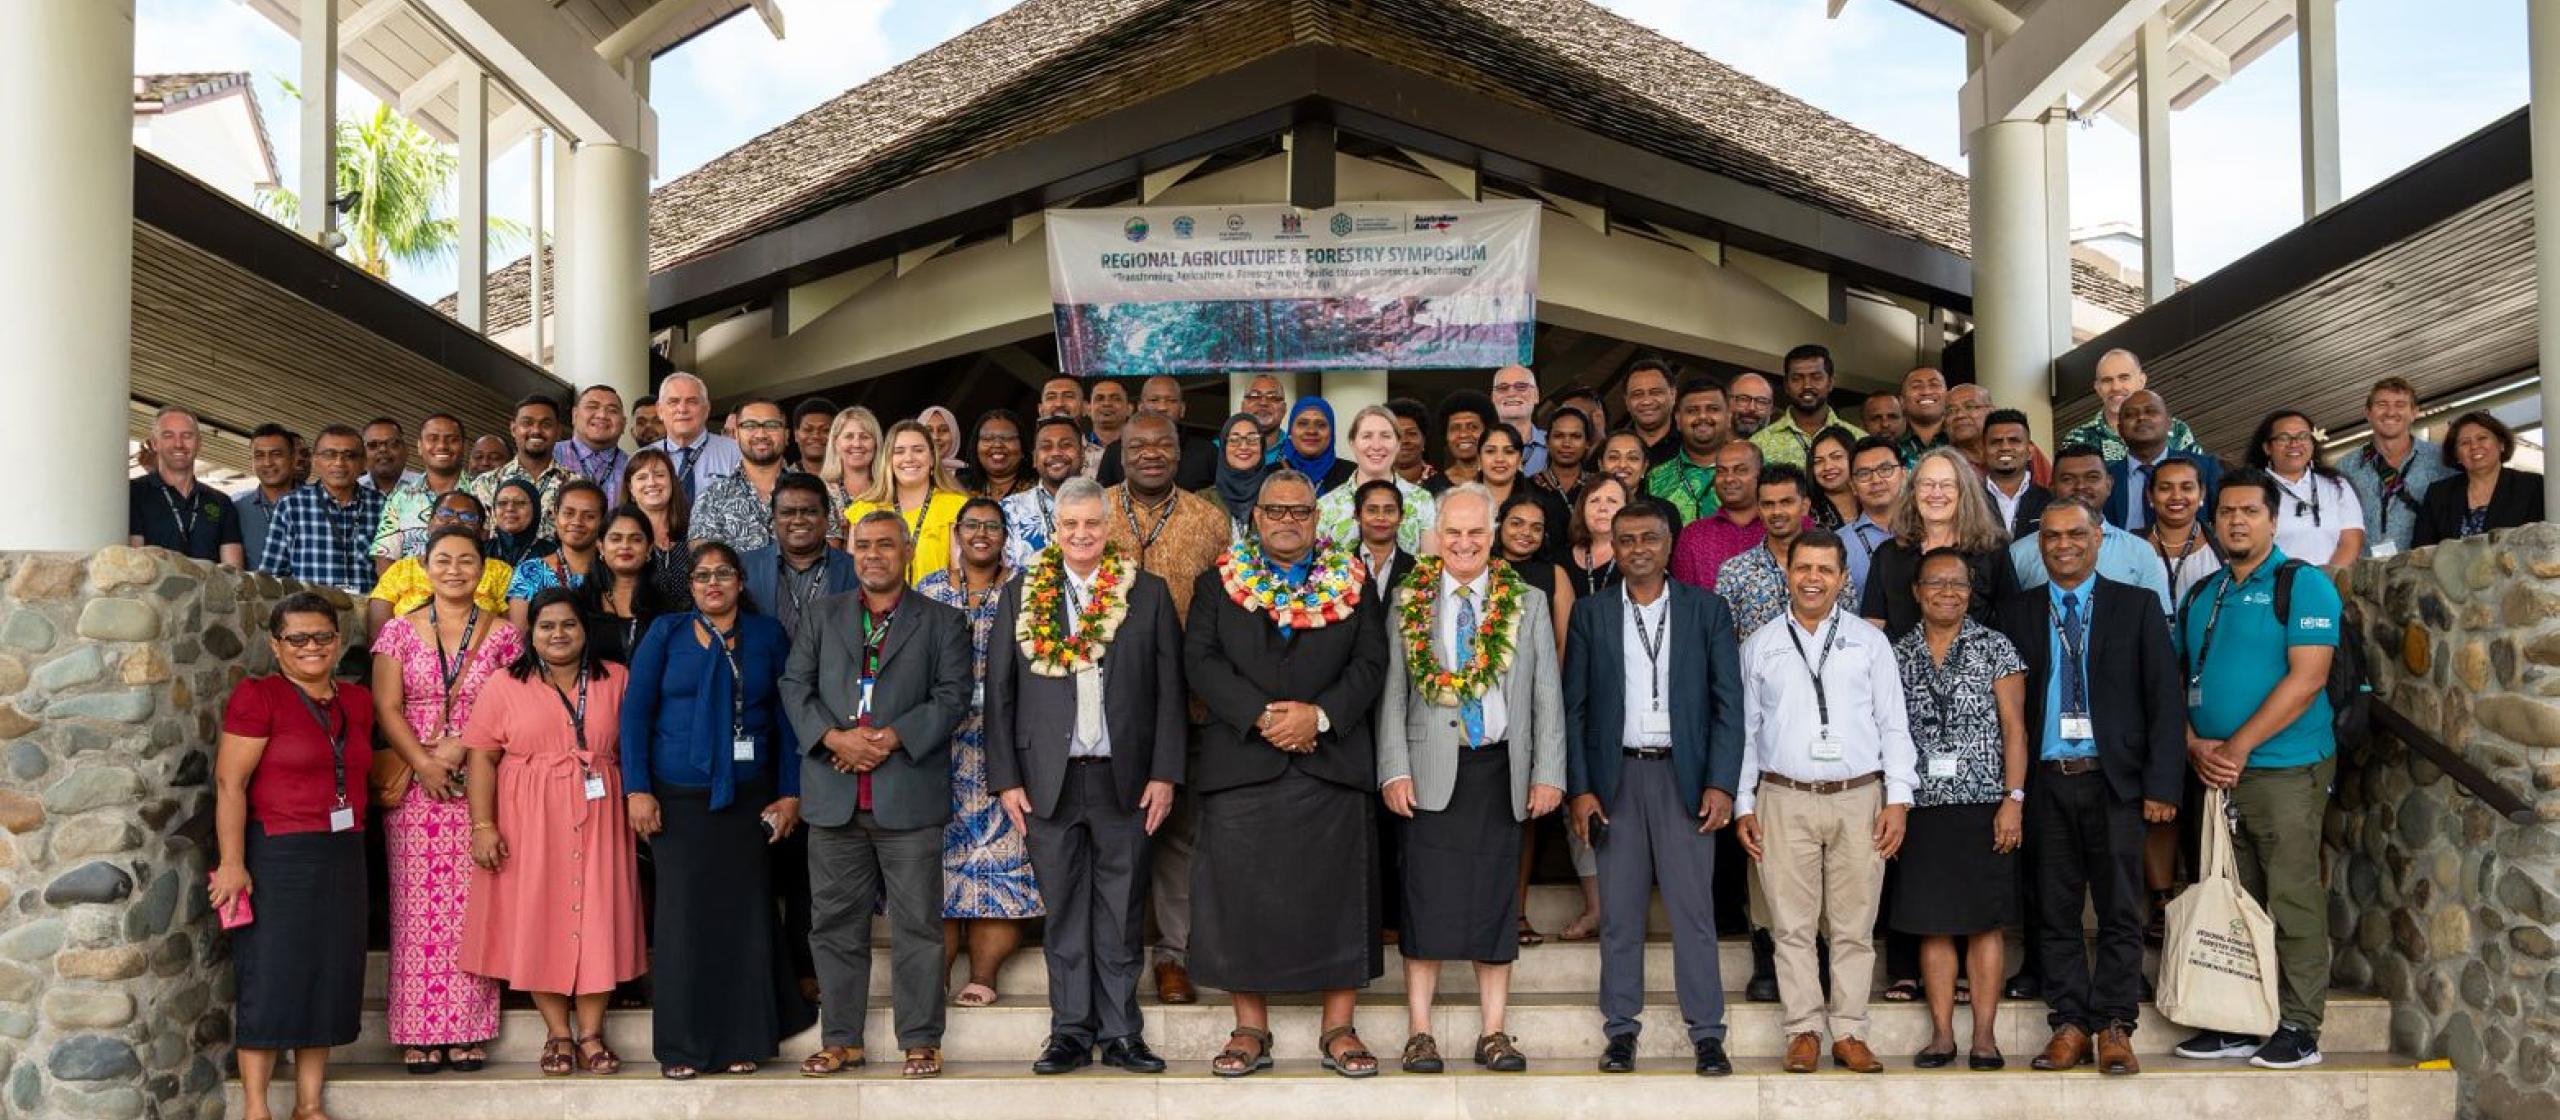 Participants at the start of the Regional Agriculture and Forestry Symposium 2023, standing for group photo.